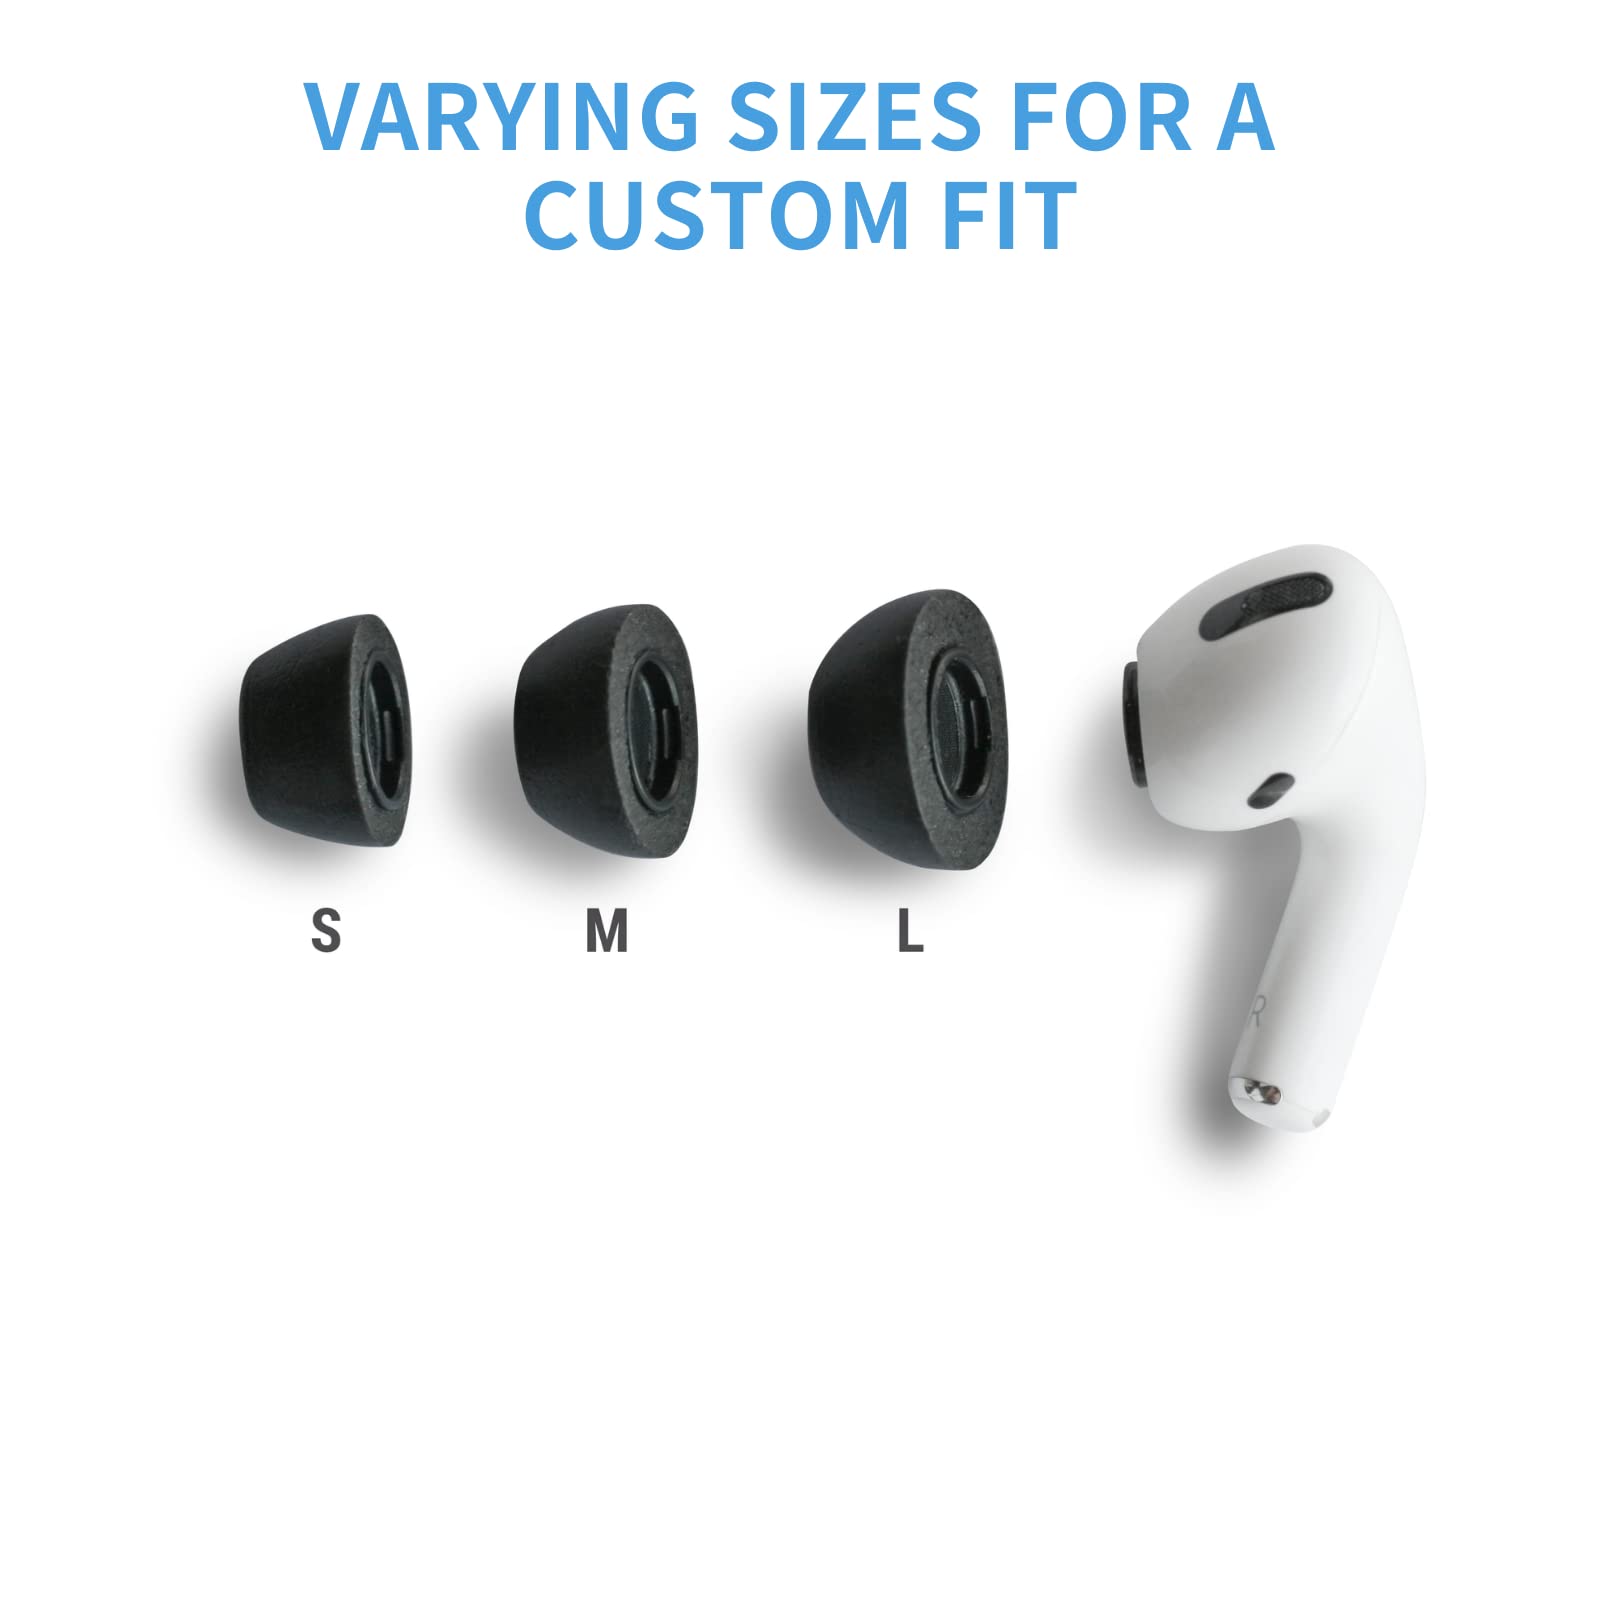 Comply Foam Ear Tips for Apple AirPods Pro Generation 1 & 2, Ultimate Comfort| Unshakeable Fit| Small, 3 Pairs